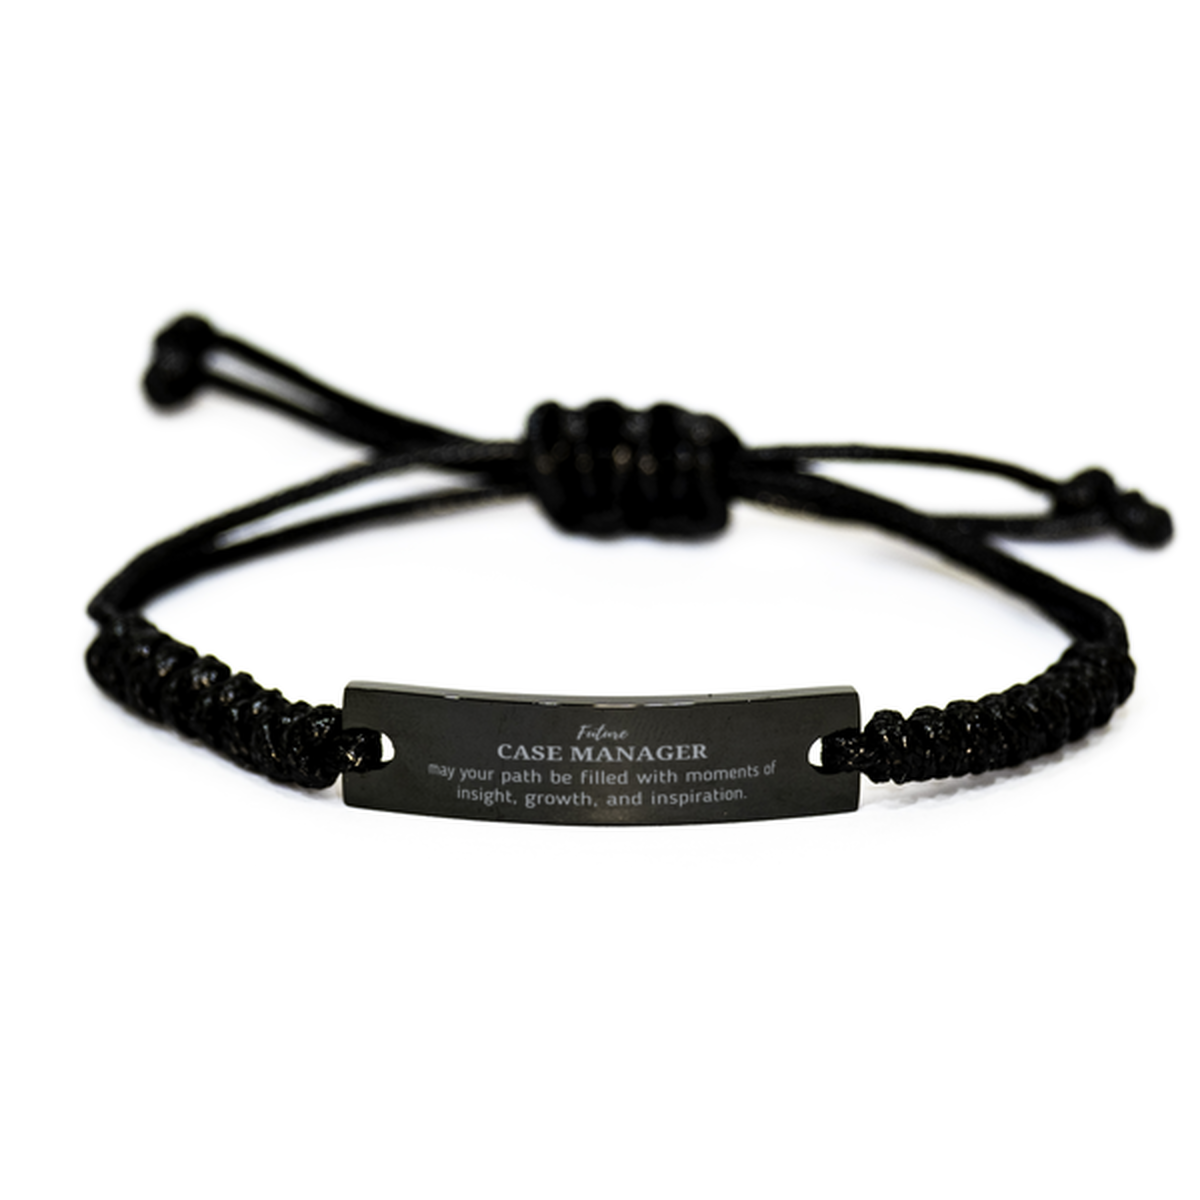 Future Case Manager Gifts, May your path be filled with moments of insight, Graduation Gifts for New Case Manager, Christmas Unique Black Rope Bracelet For Men, Women, Friends